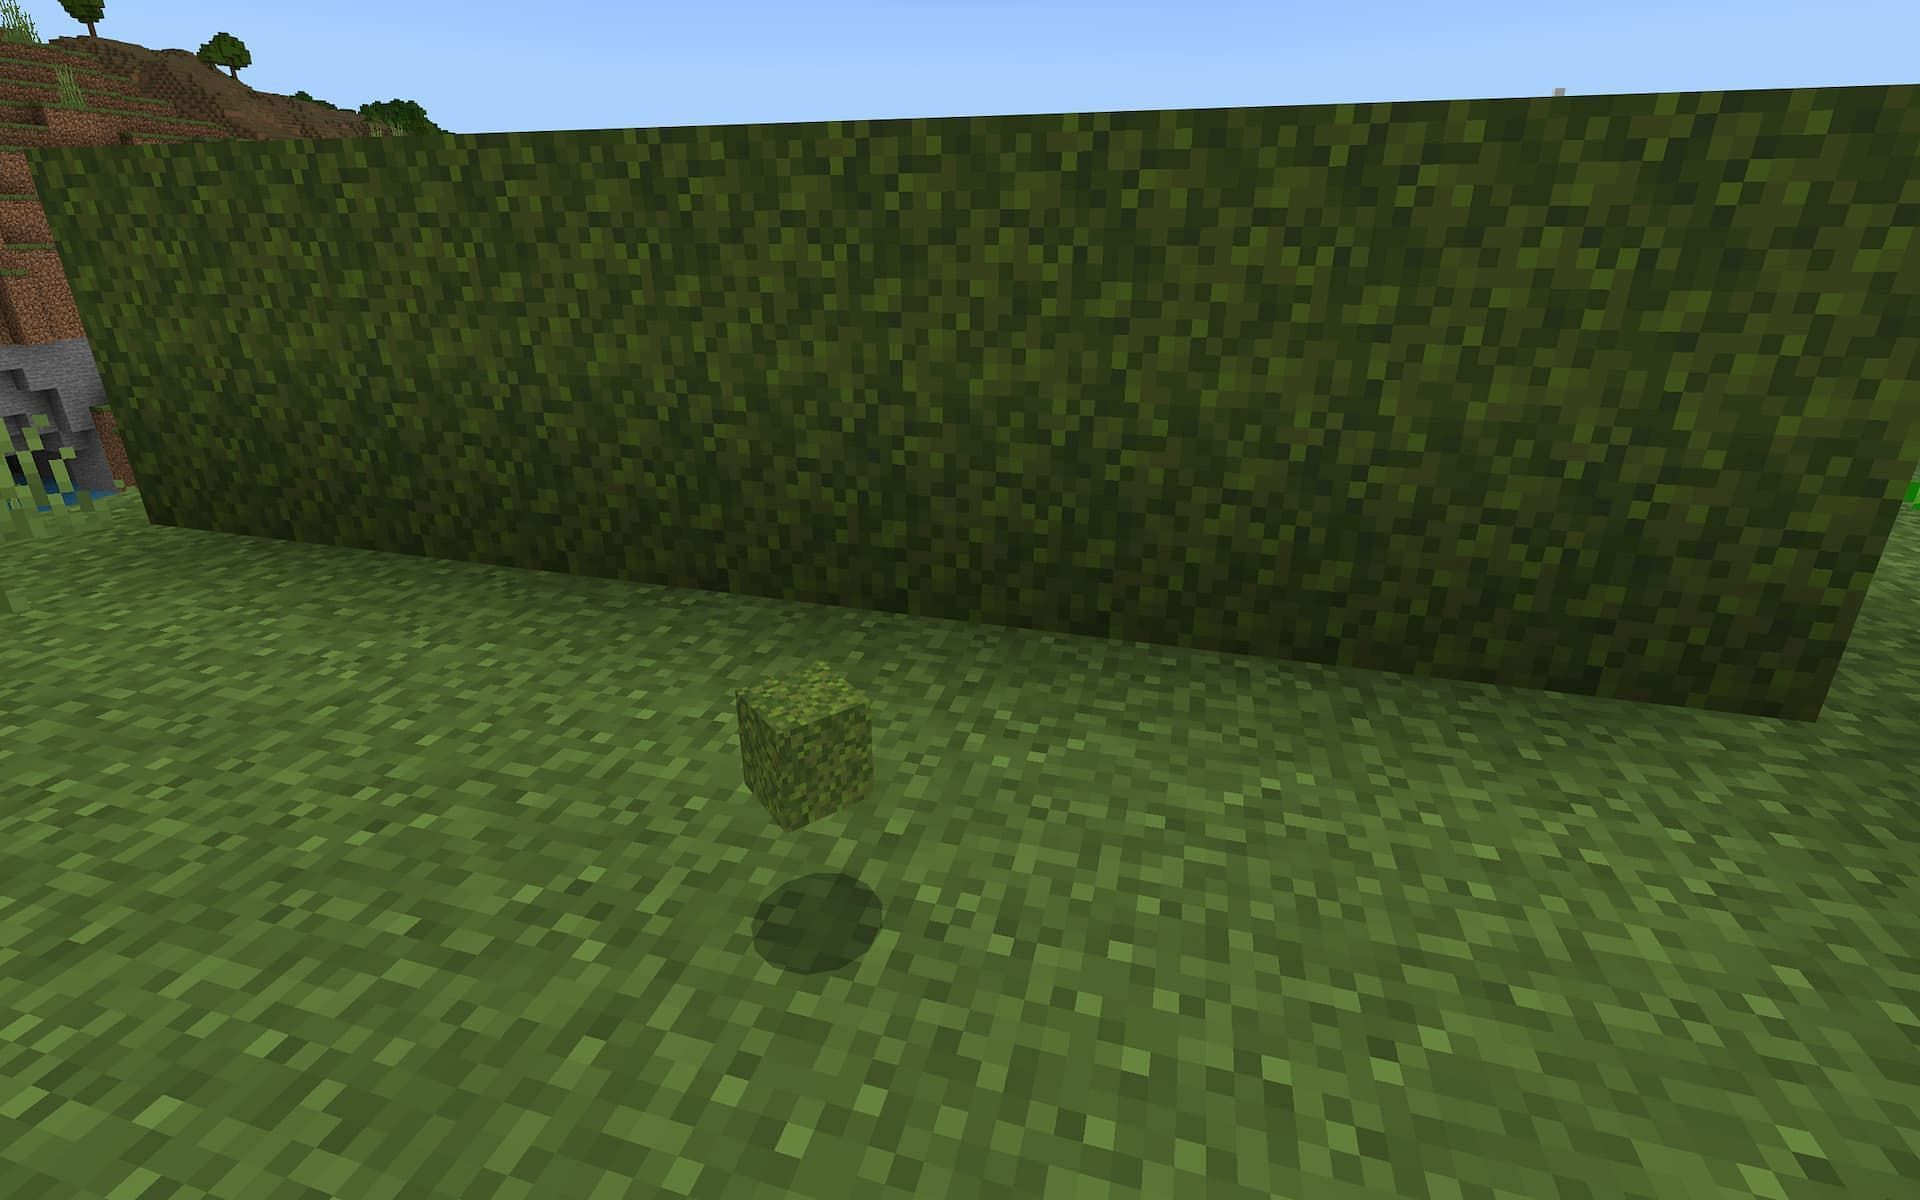 In the Overworld of Minecraft, a block of moss floats in front of a wall of moss.